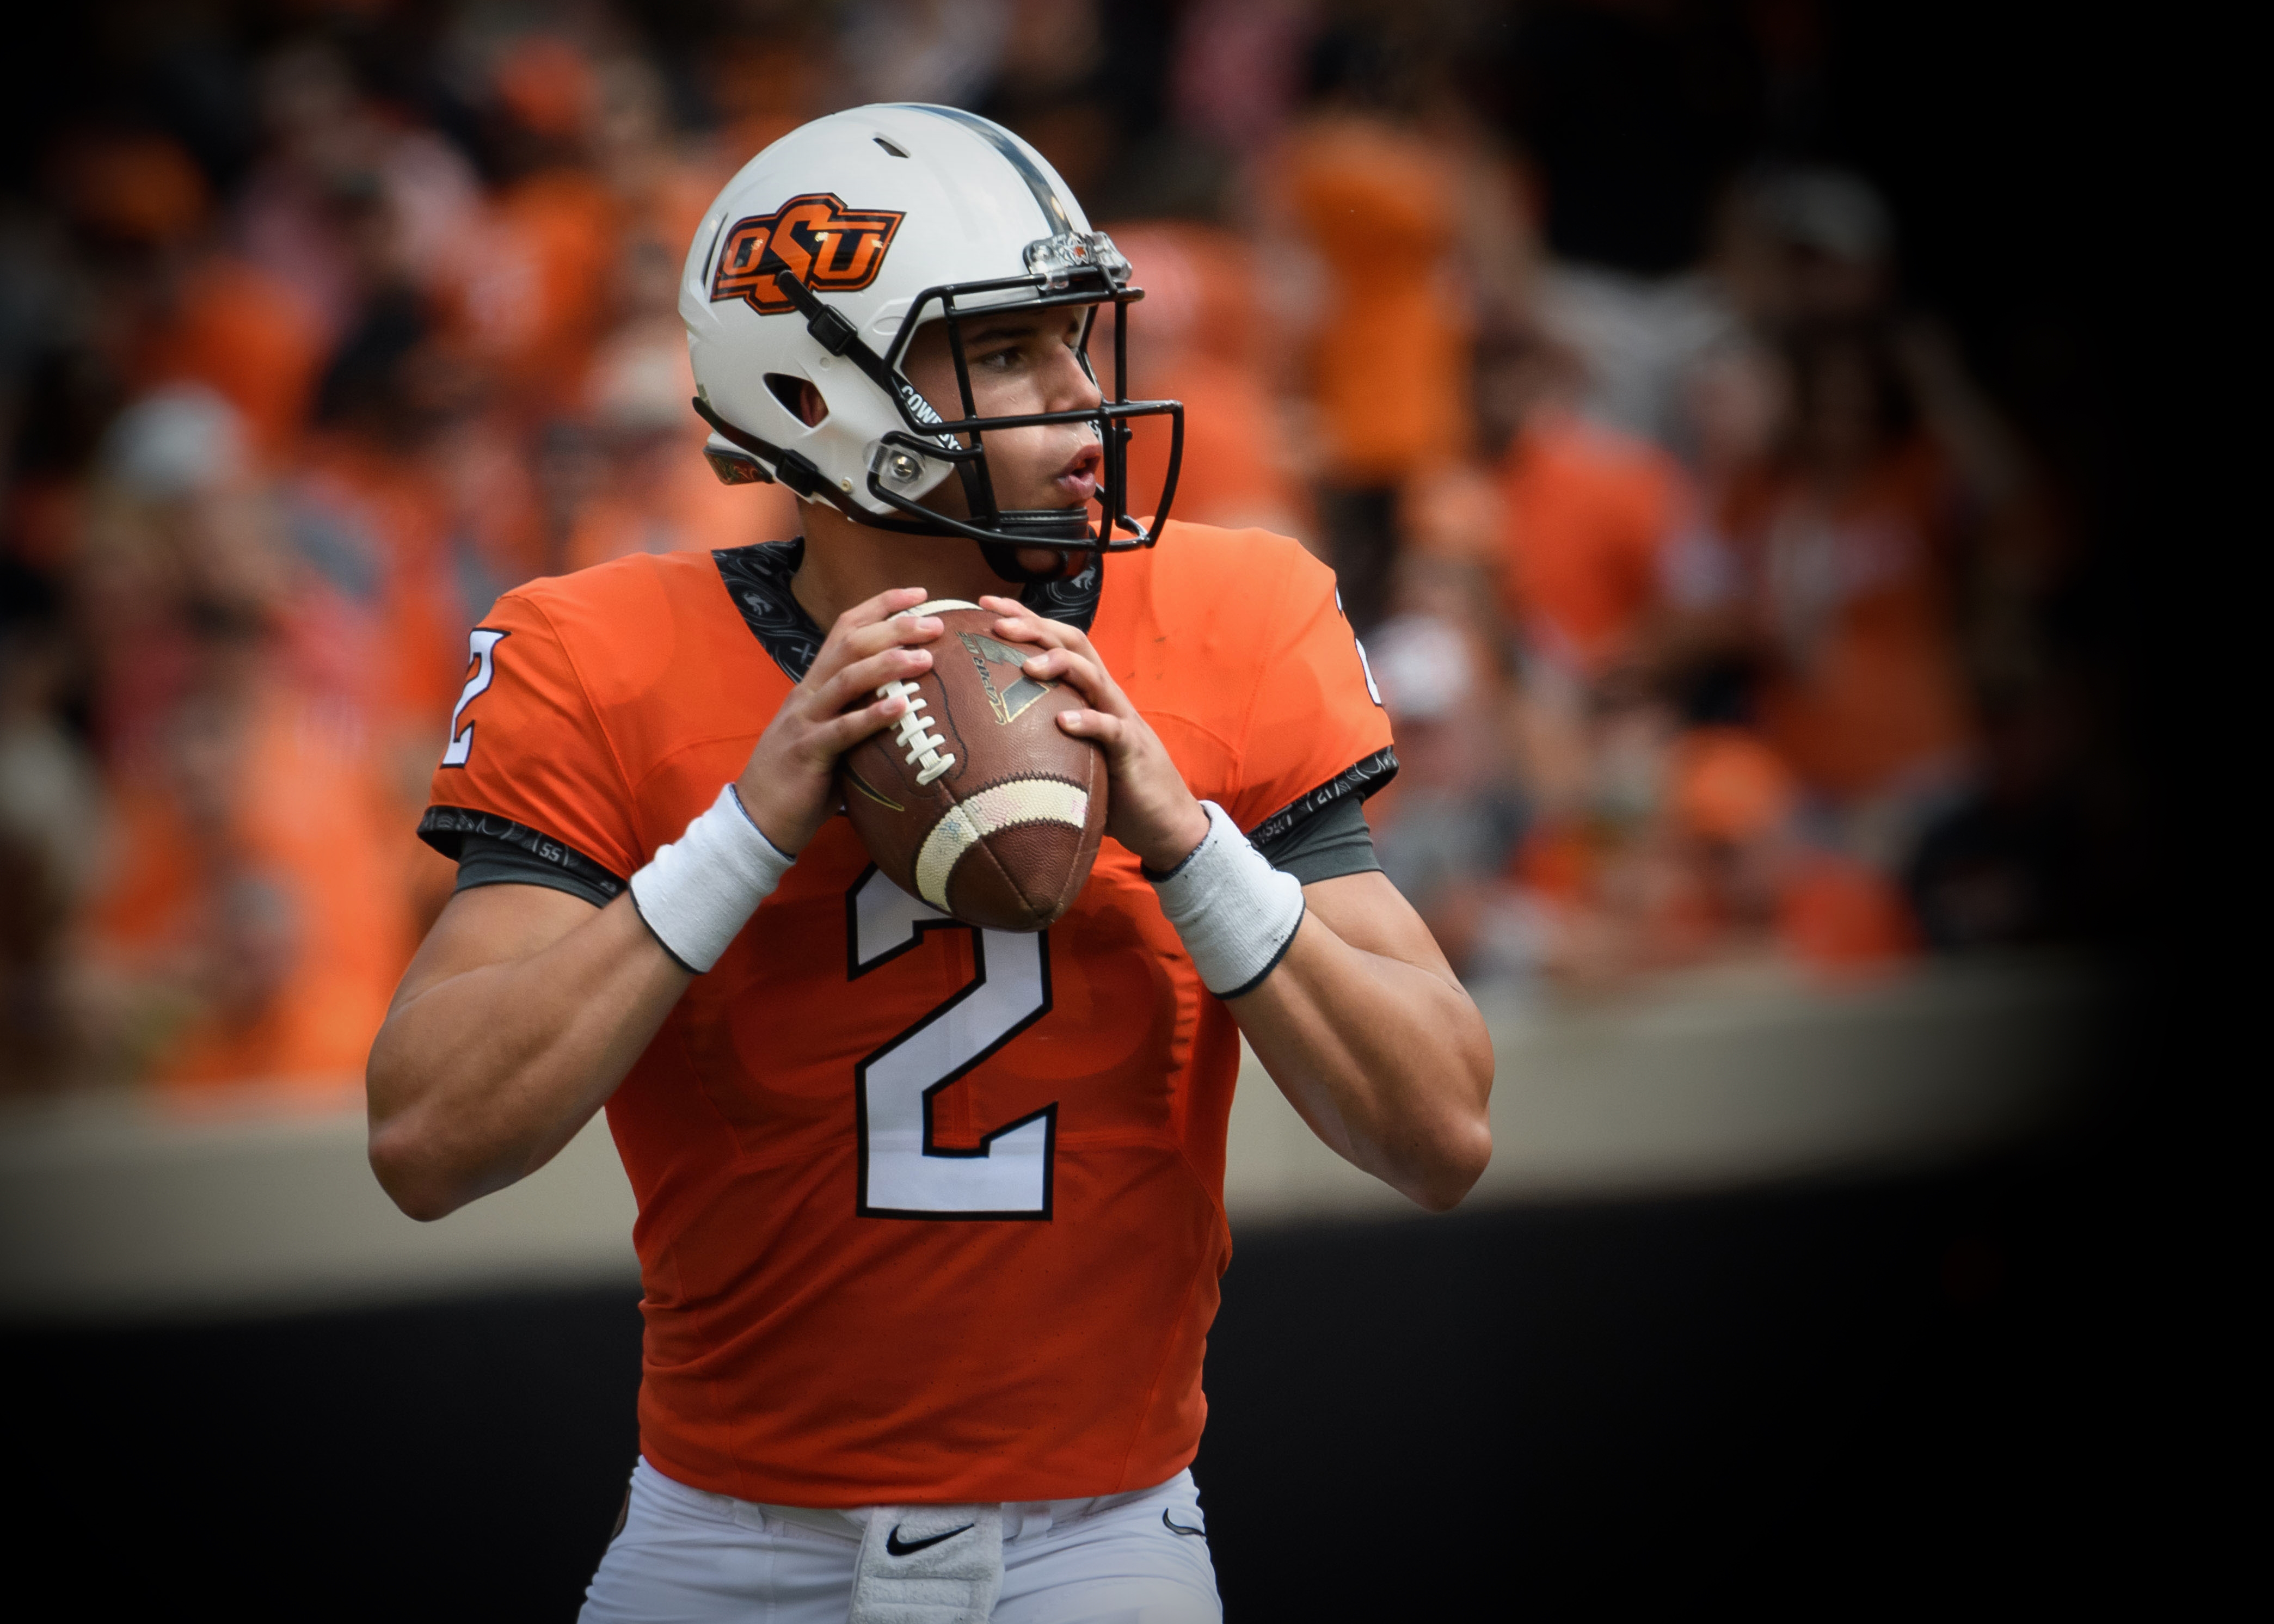 Mason Rudolph joins the Pittsburgh Steelers as the 76th overall pick